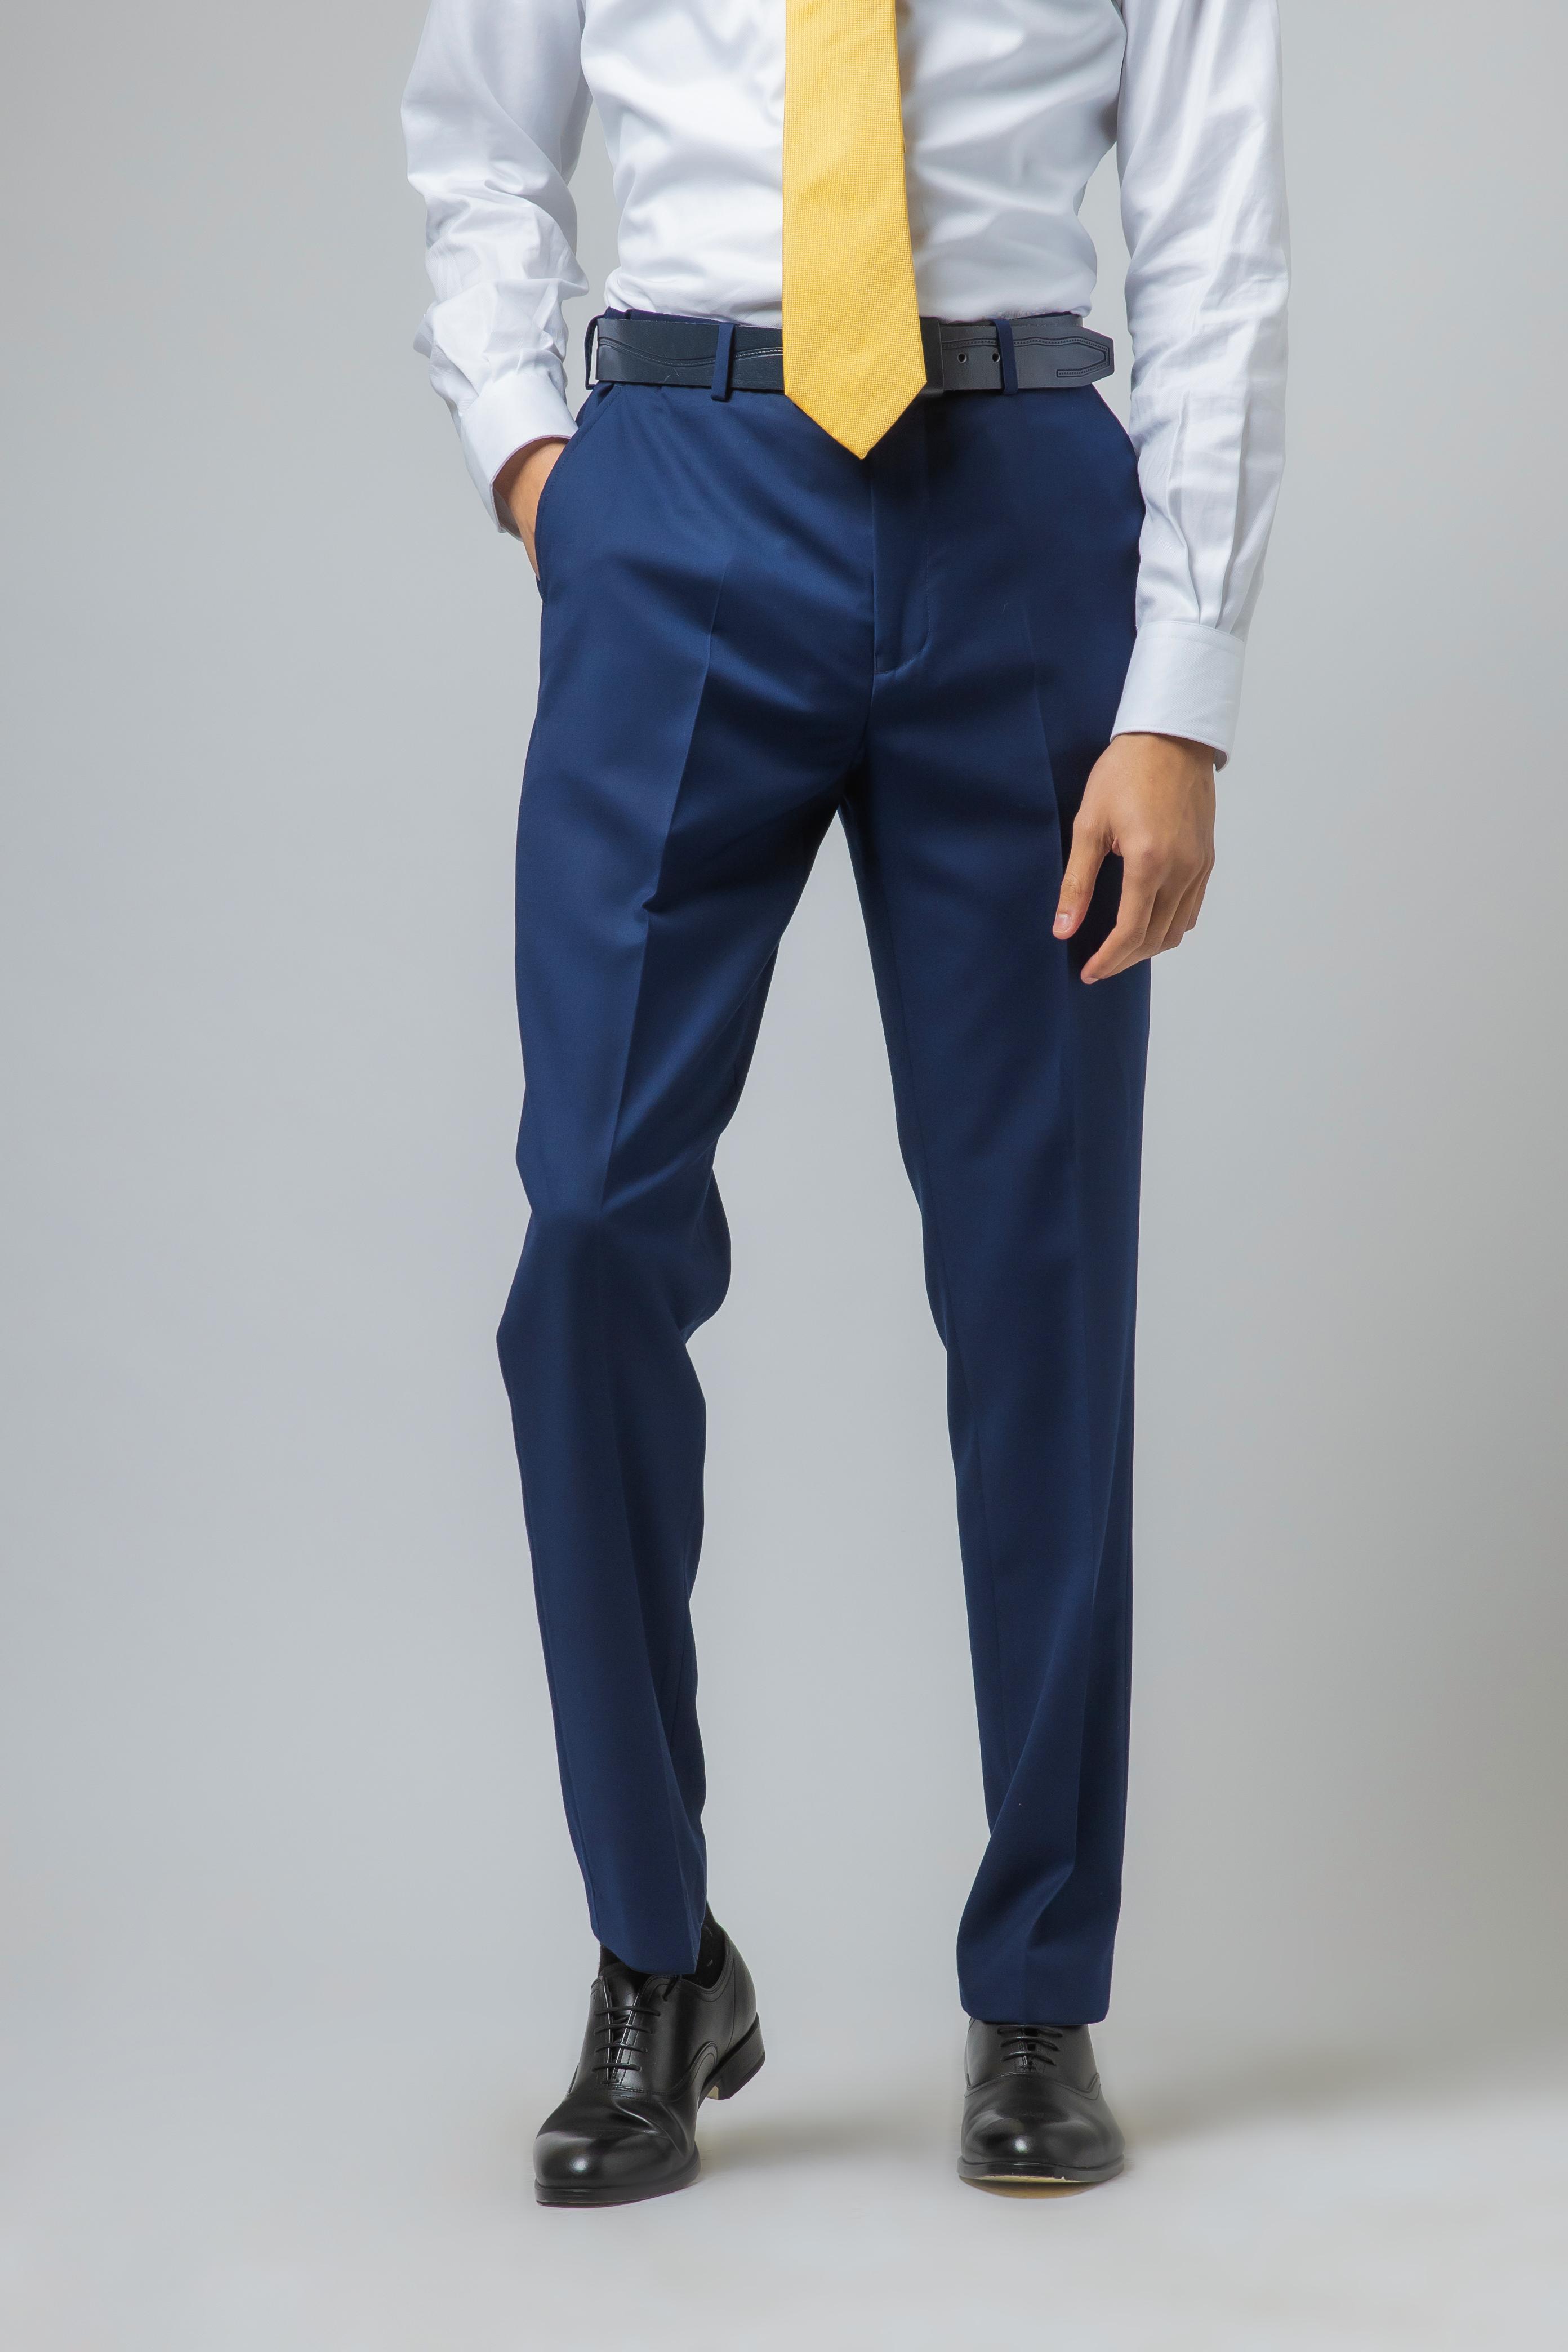 Men's Slim Fit Navy Trousers - ISAAC 